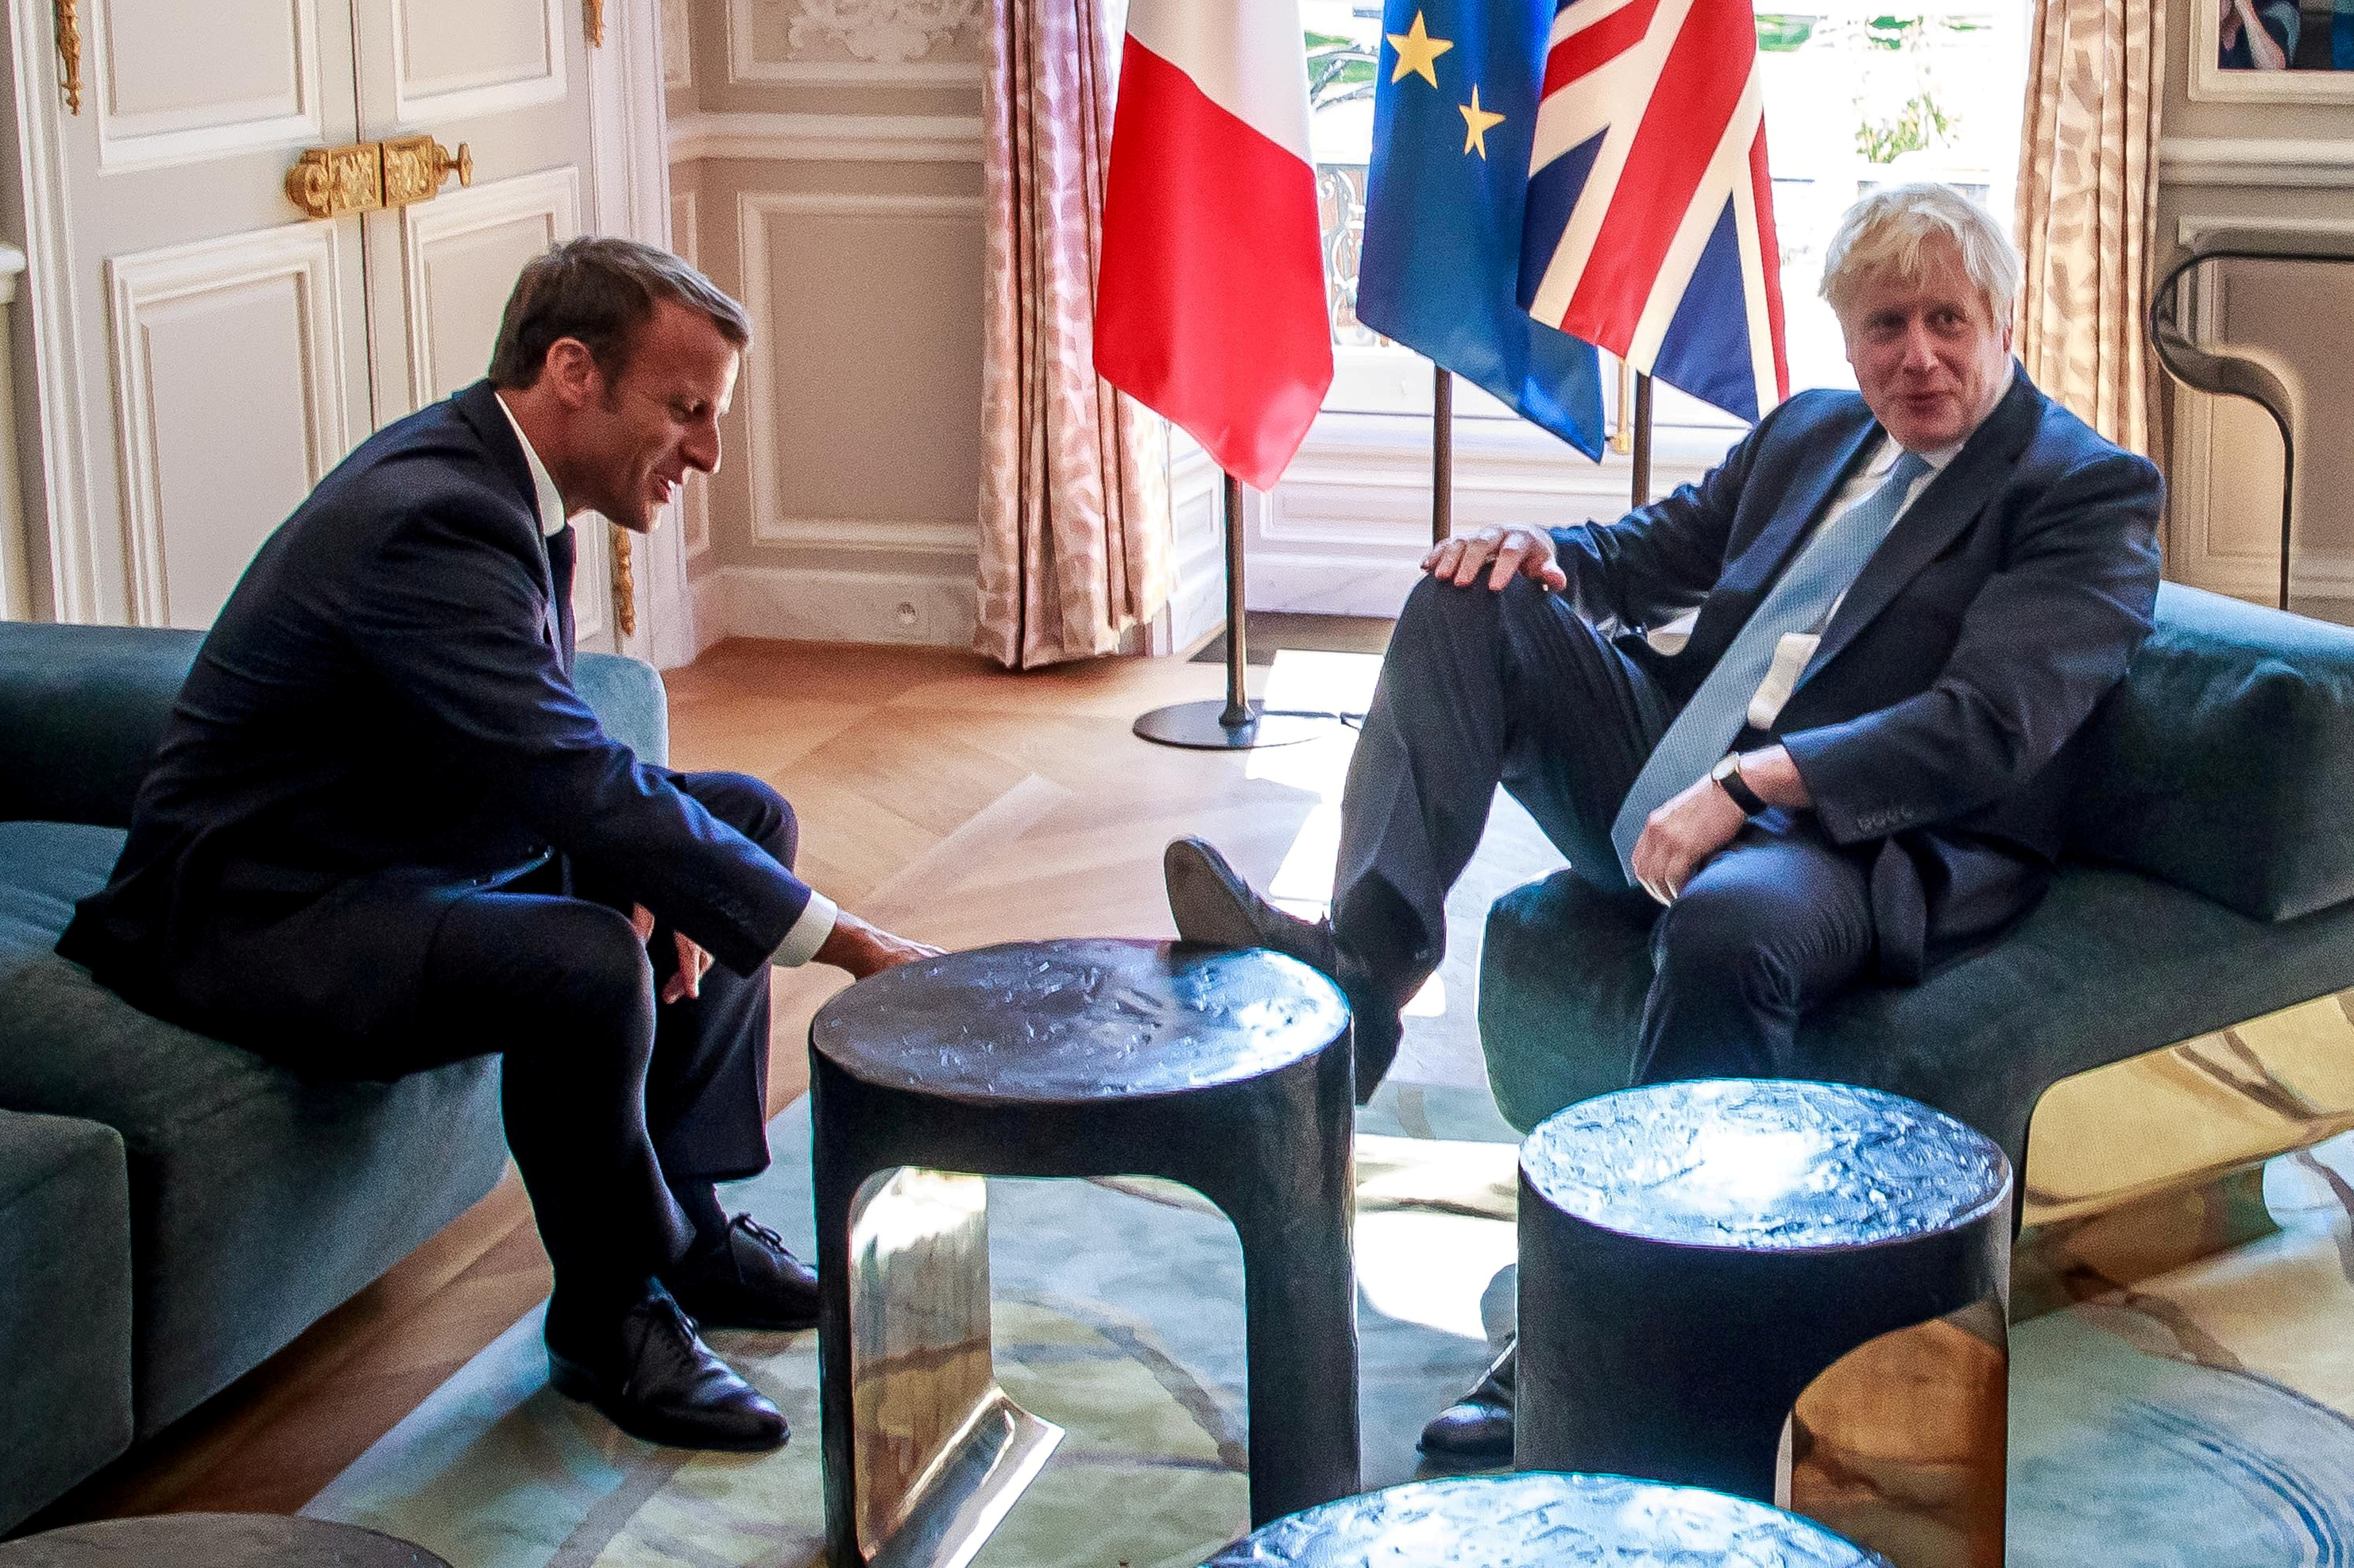 UK Prime Minister Boris Johnson puts his foot on table as French President Emmanuel Macron watching in, Palace of l'Élysée Paris, August 22, 2019.